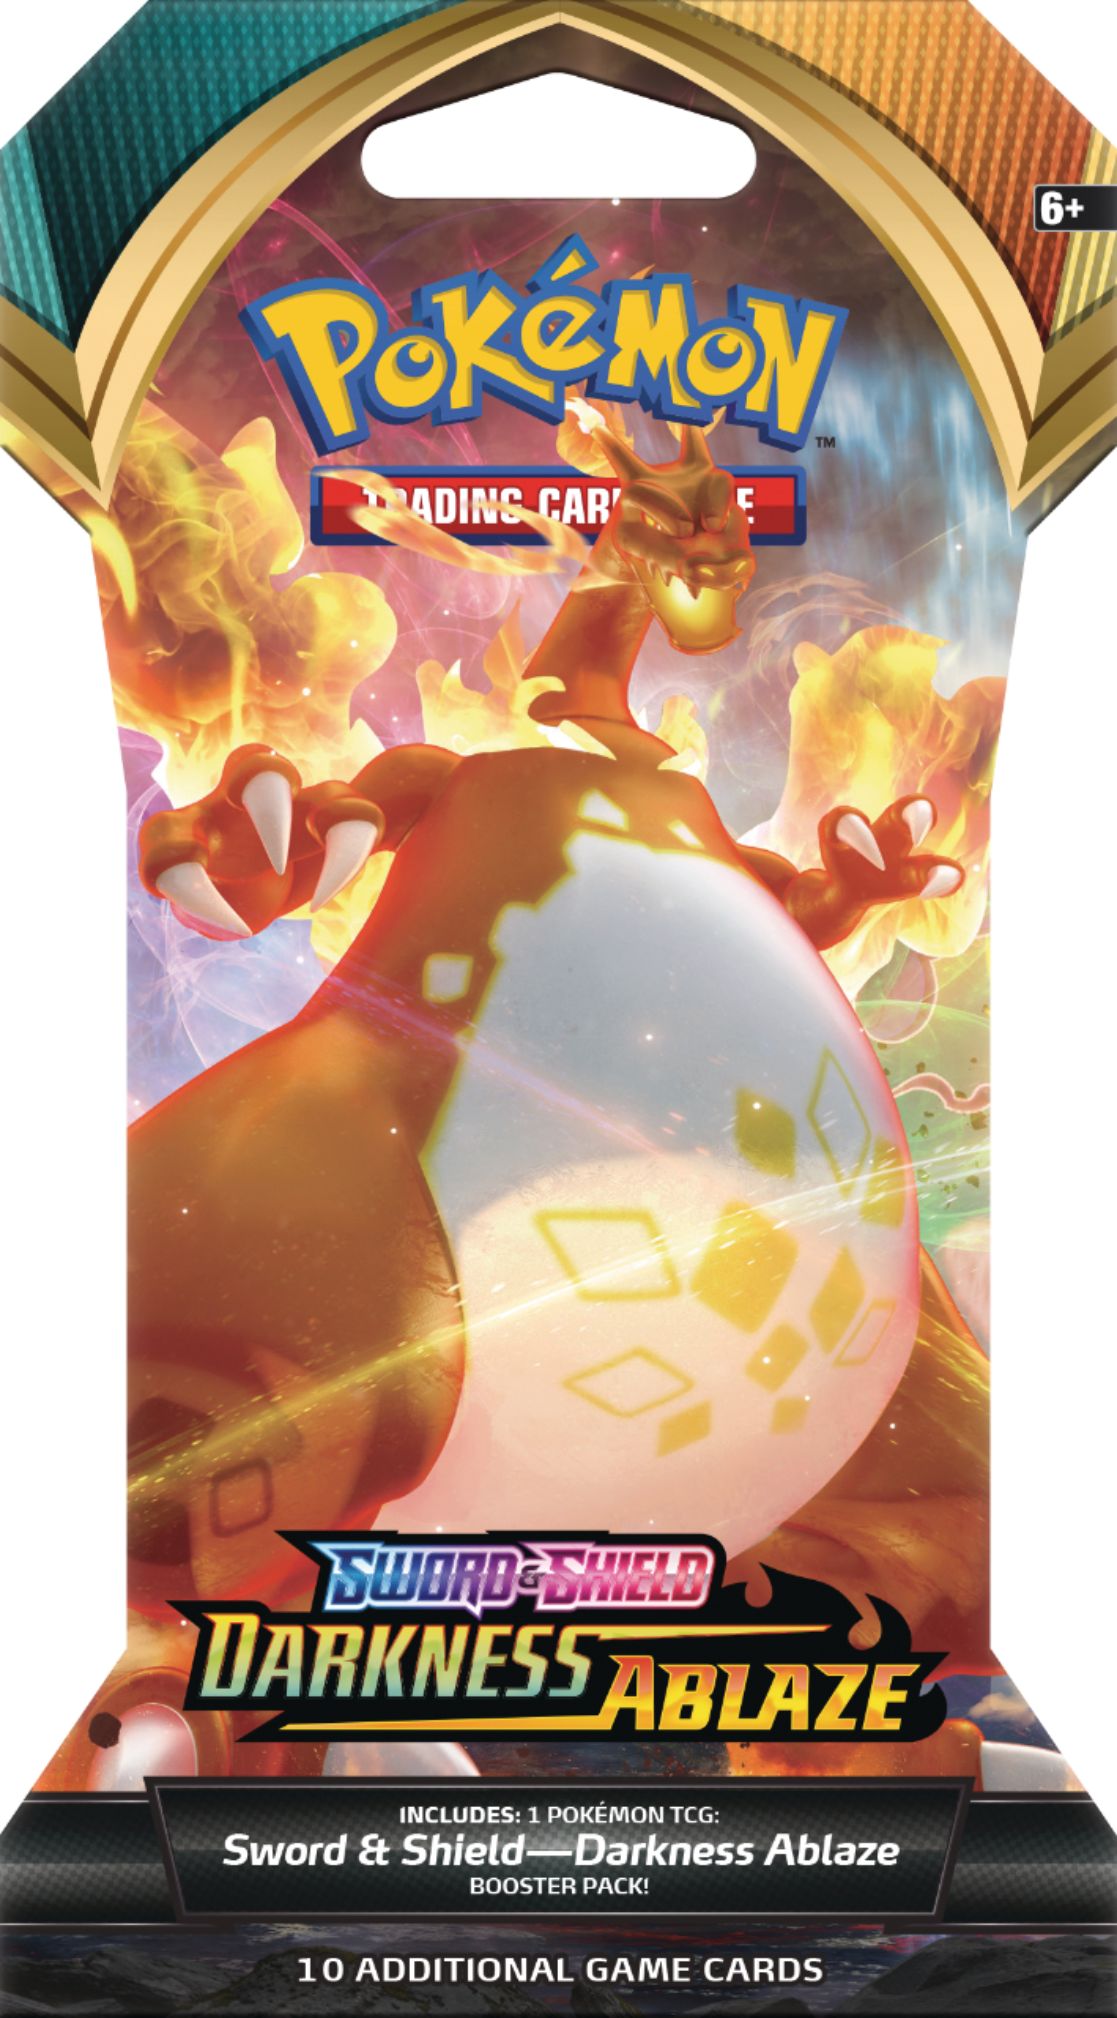 Message Delivery Pokemon Darkness Ablaze Booster Pack PTCGO Code x36 